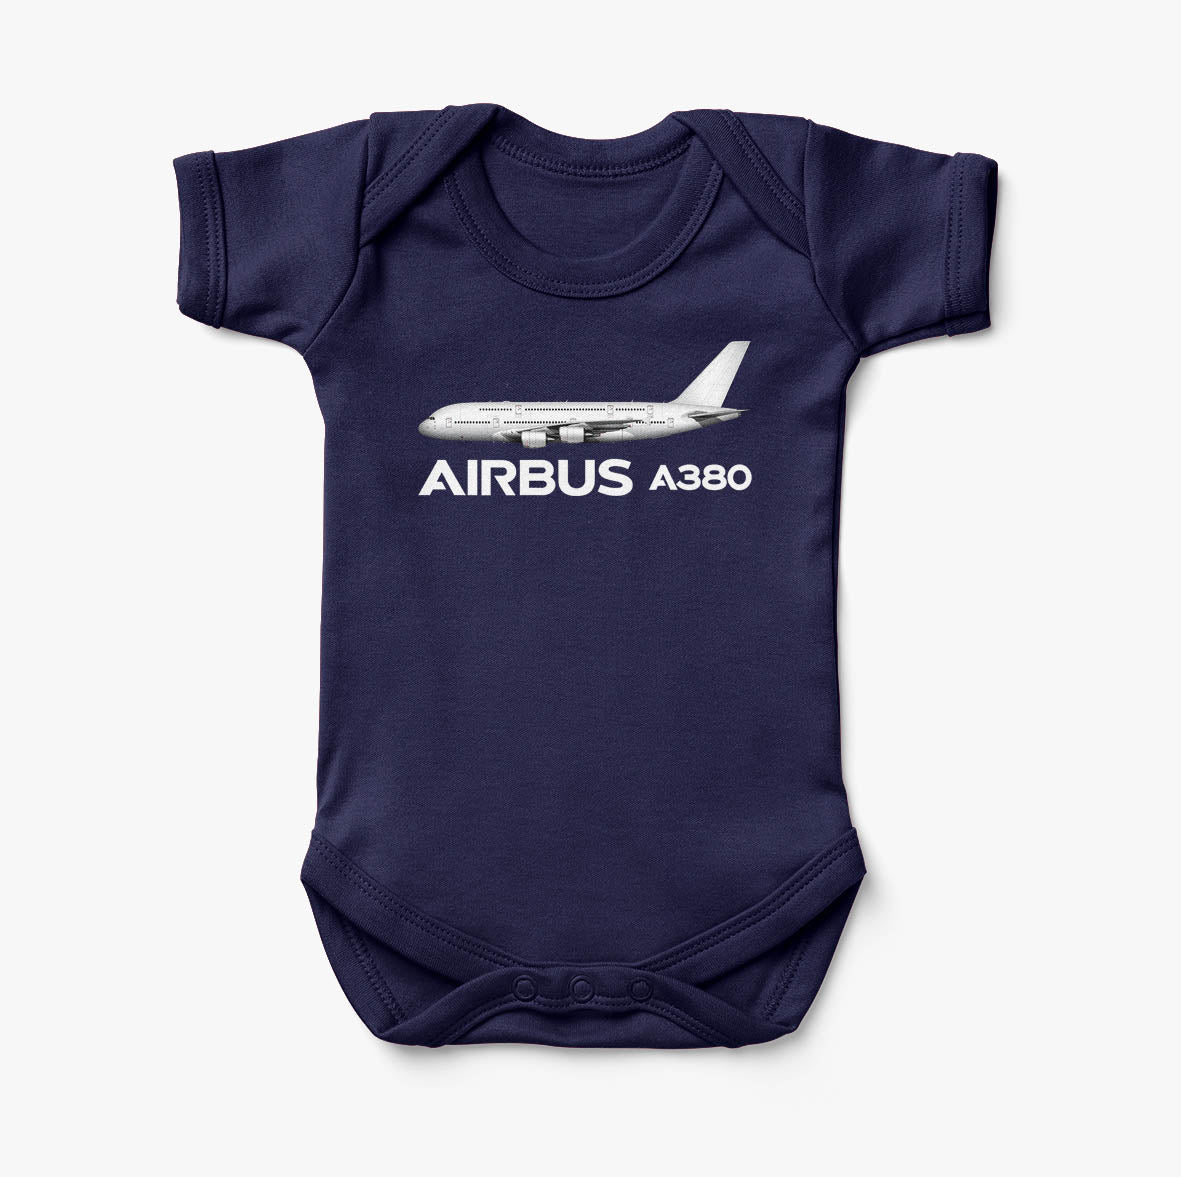 The Airbus A380 Designed Baby Bodysuits